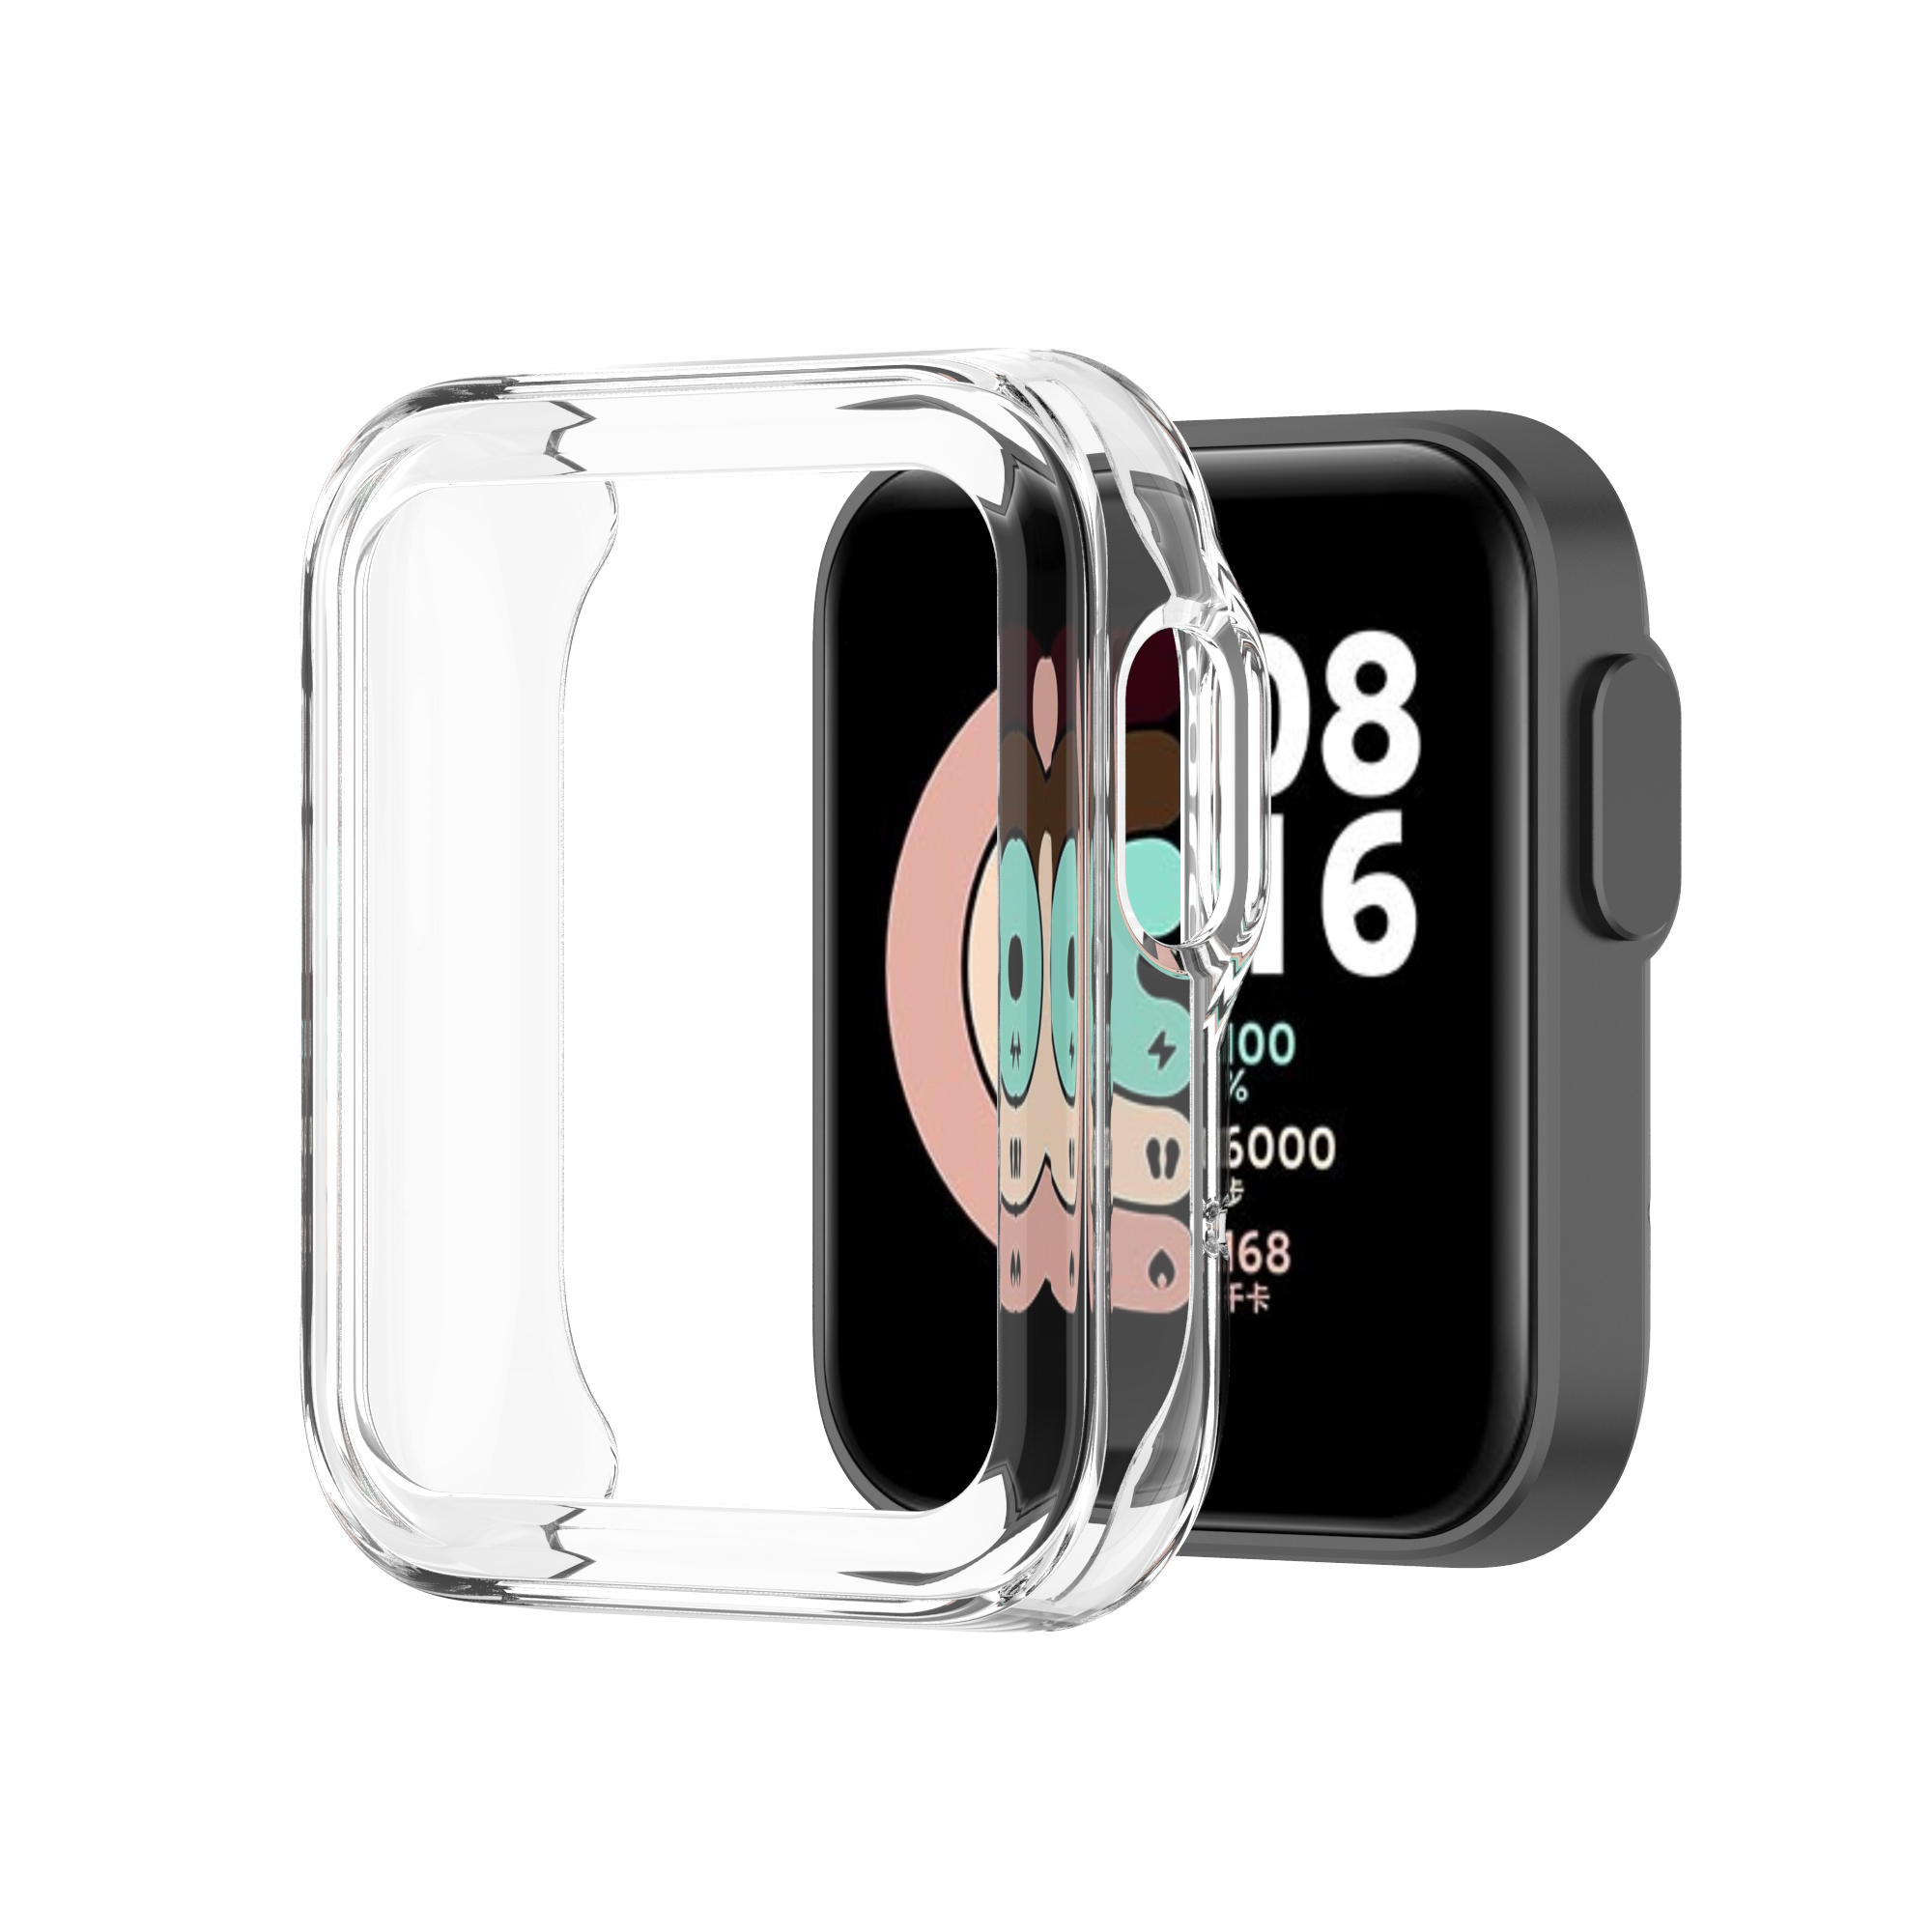 Bakeey-Transparent-TPU-Half-pack-Watch-Case-Cover-Watch-Protector-For-Xiaomi-Mi-Watch-Lite-1819481-5